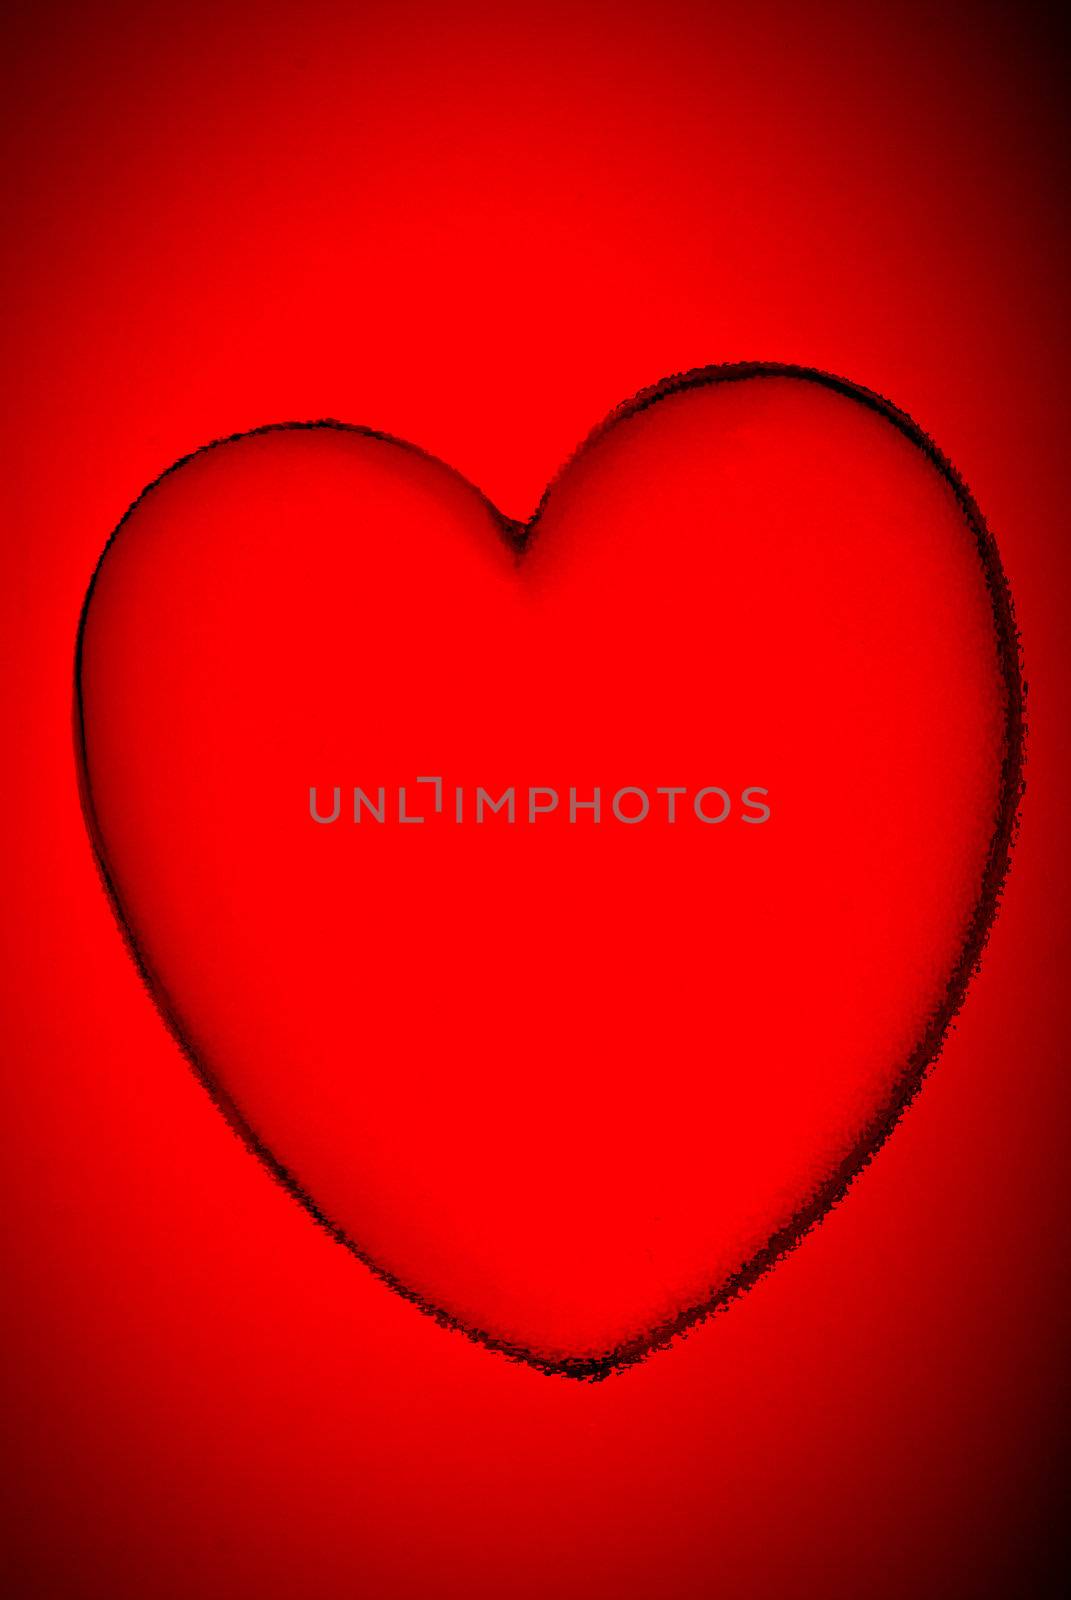 red heartshape, great for Valentine's day background designs.